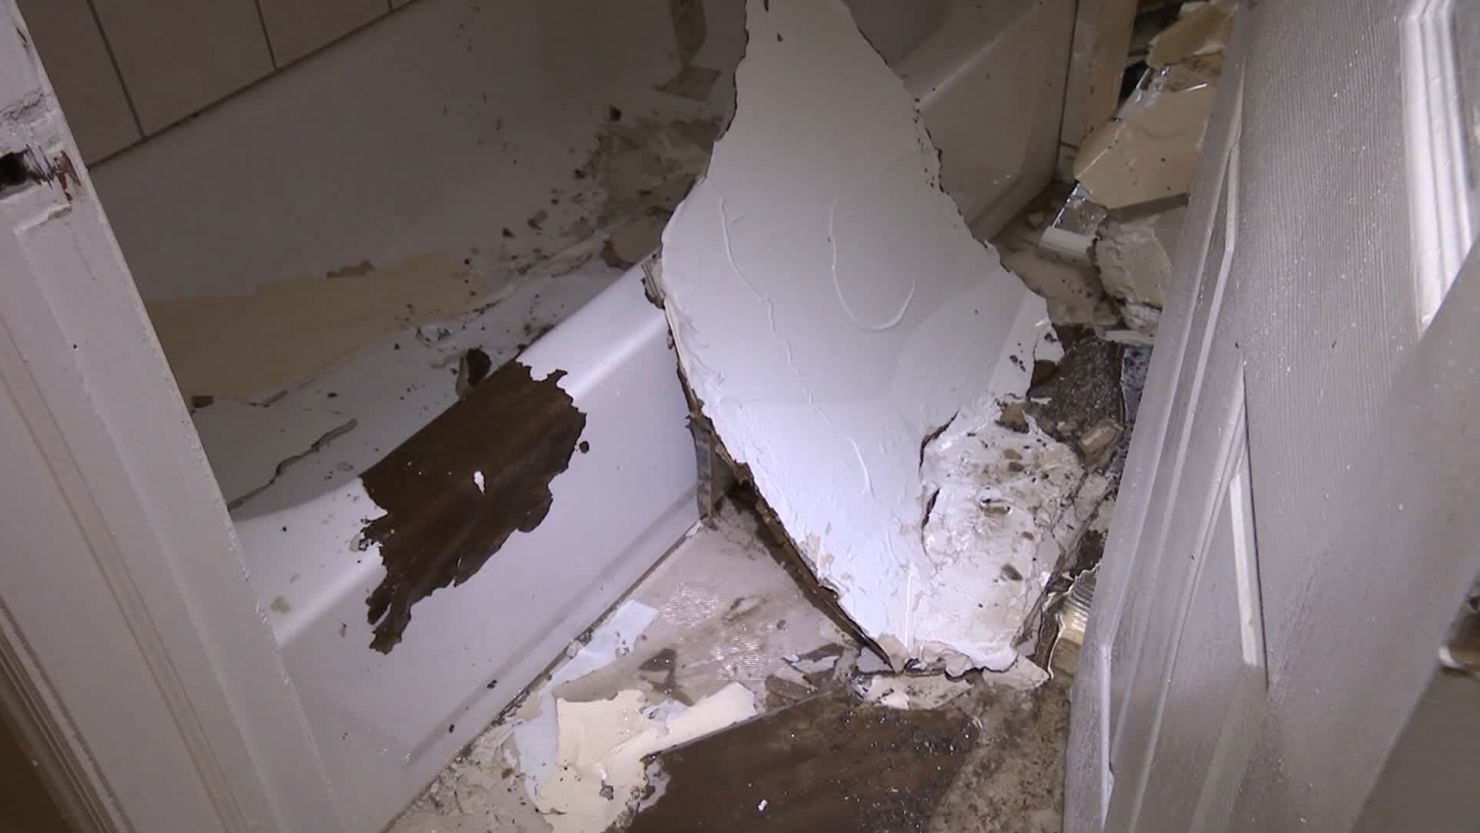 This image, from CNN affiliate WCBS, shows conditions in one of the Newark apartments it says was part of the homeless relocation program.